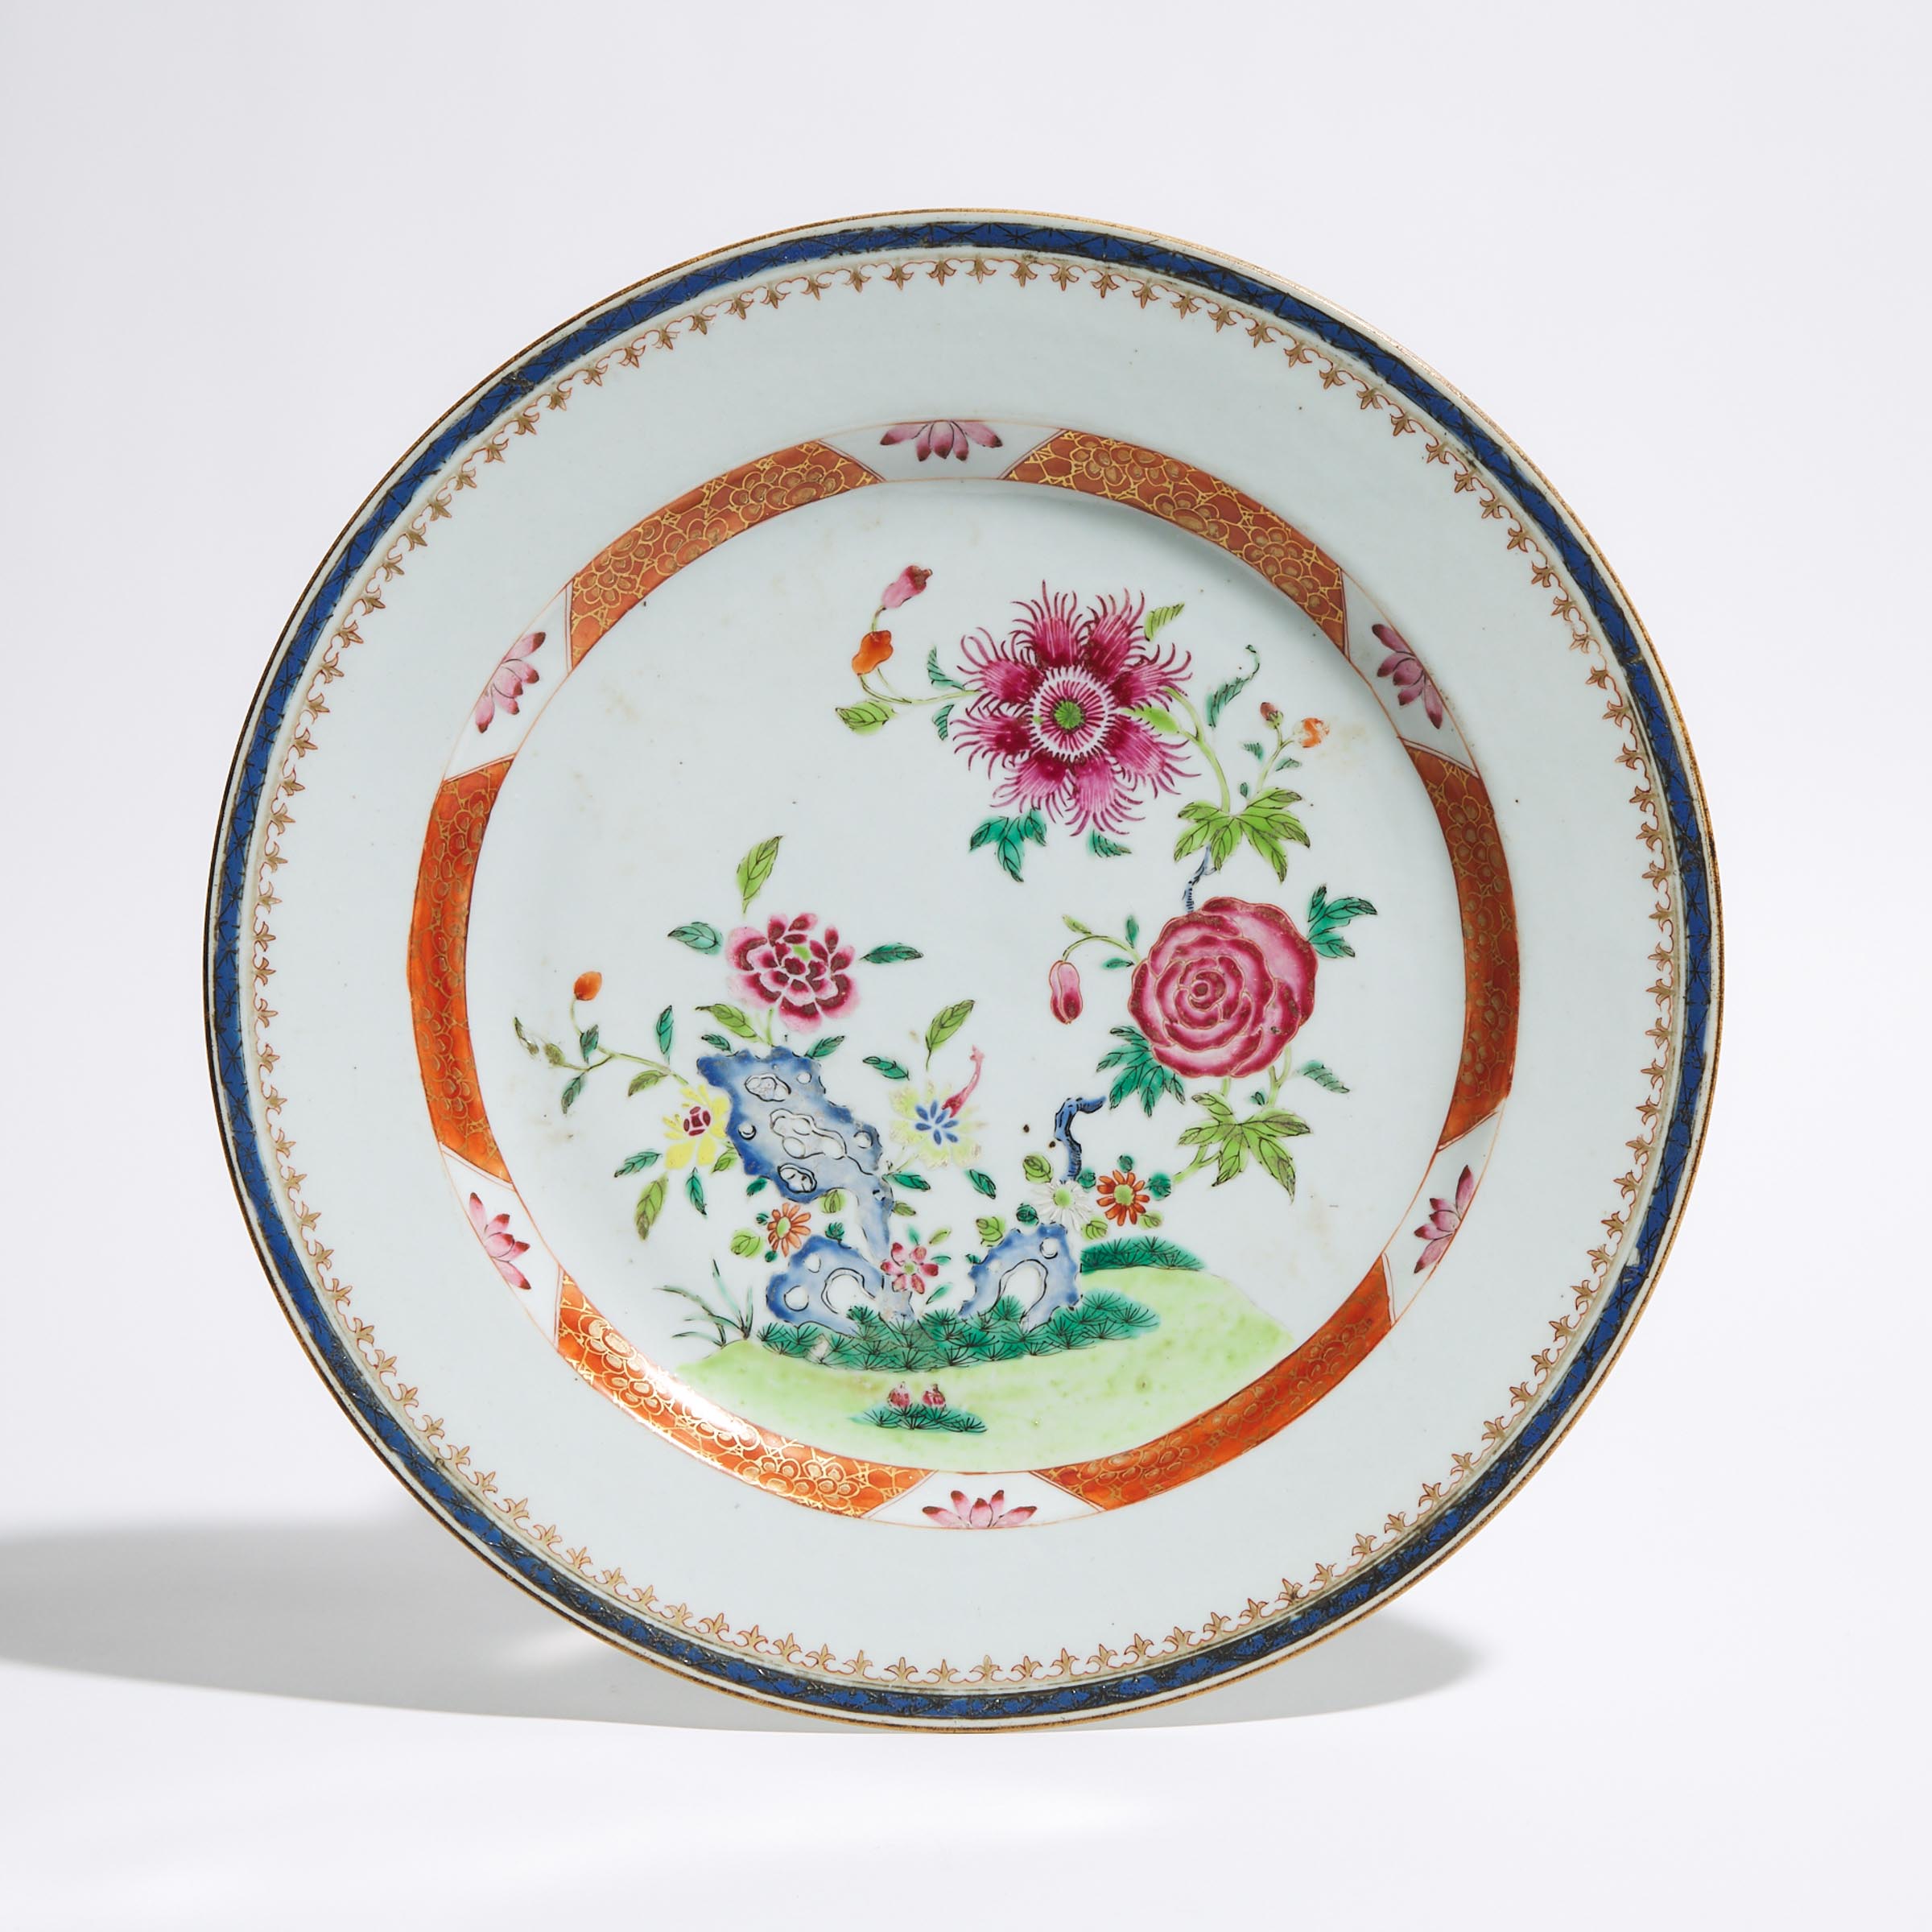 A Chinese Export Famille Rose 'Floral' Charger, Qianlong Period, 18th Century